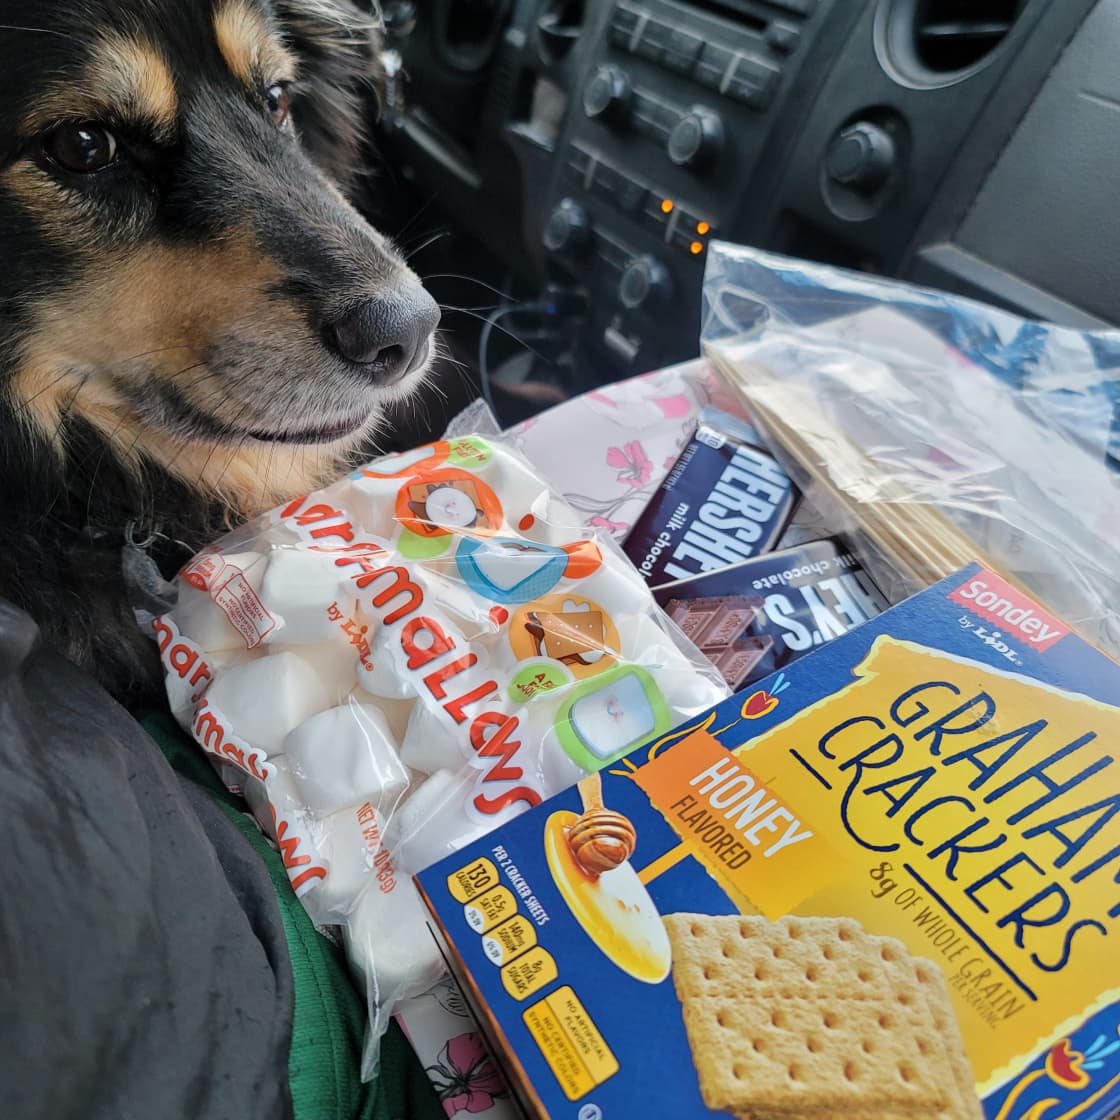 The smores kit and our pup